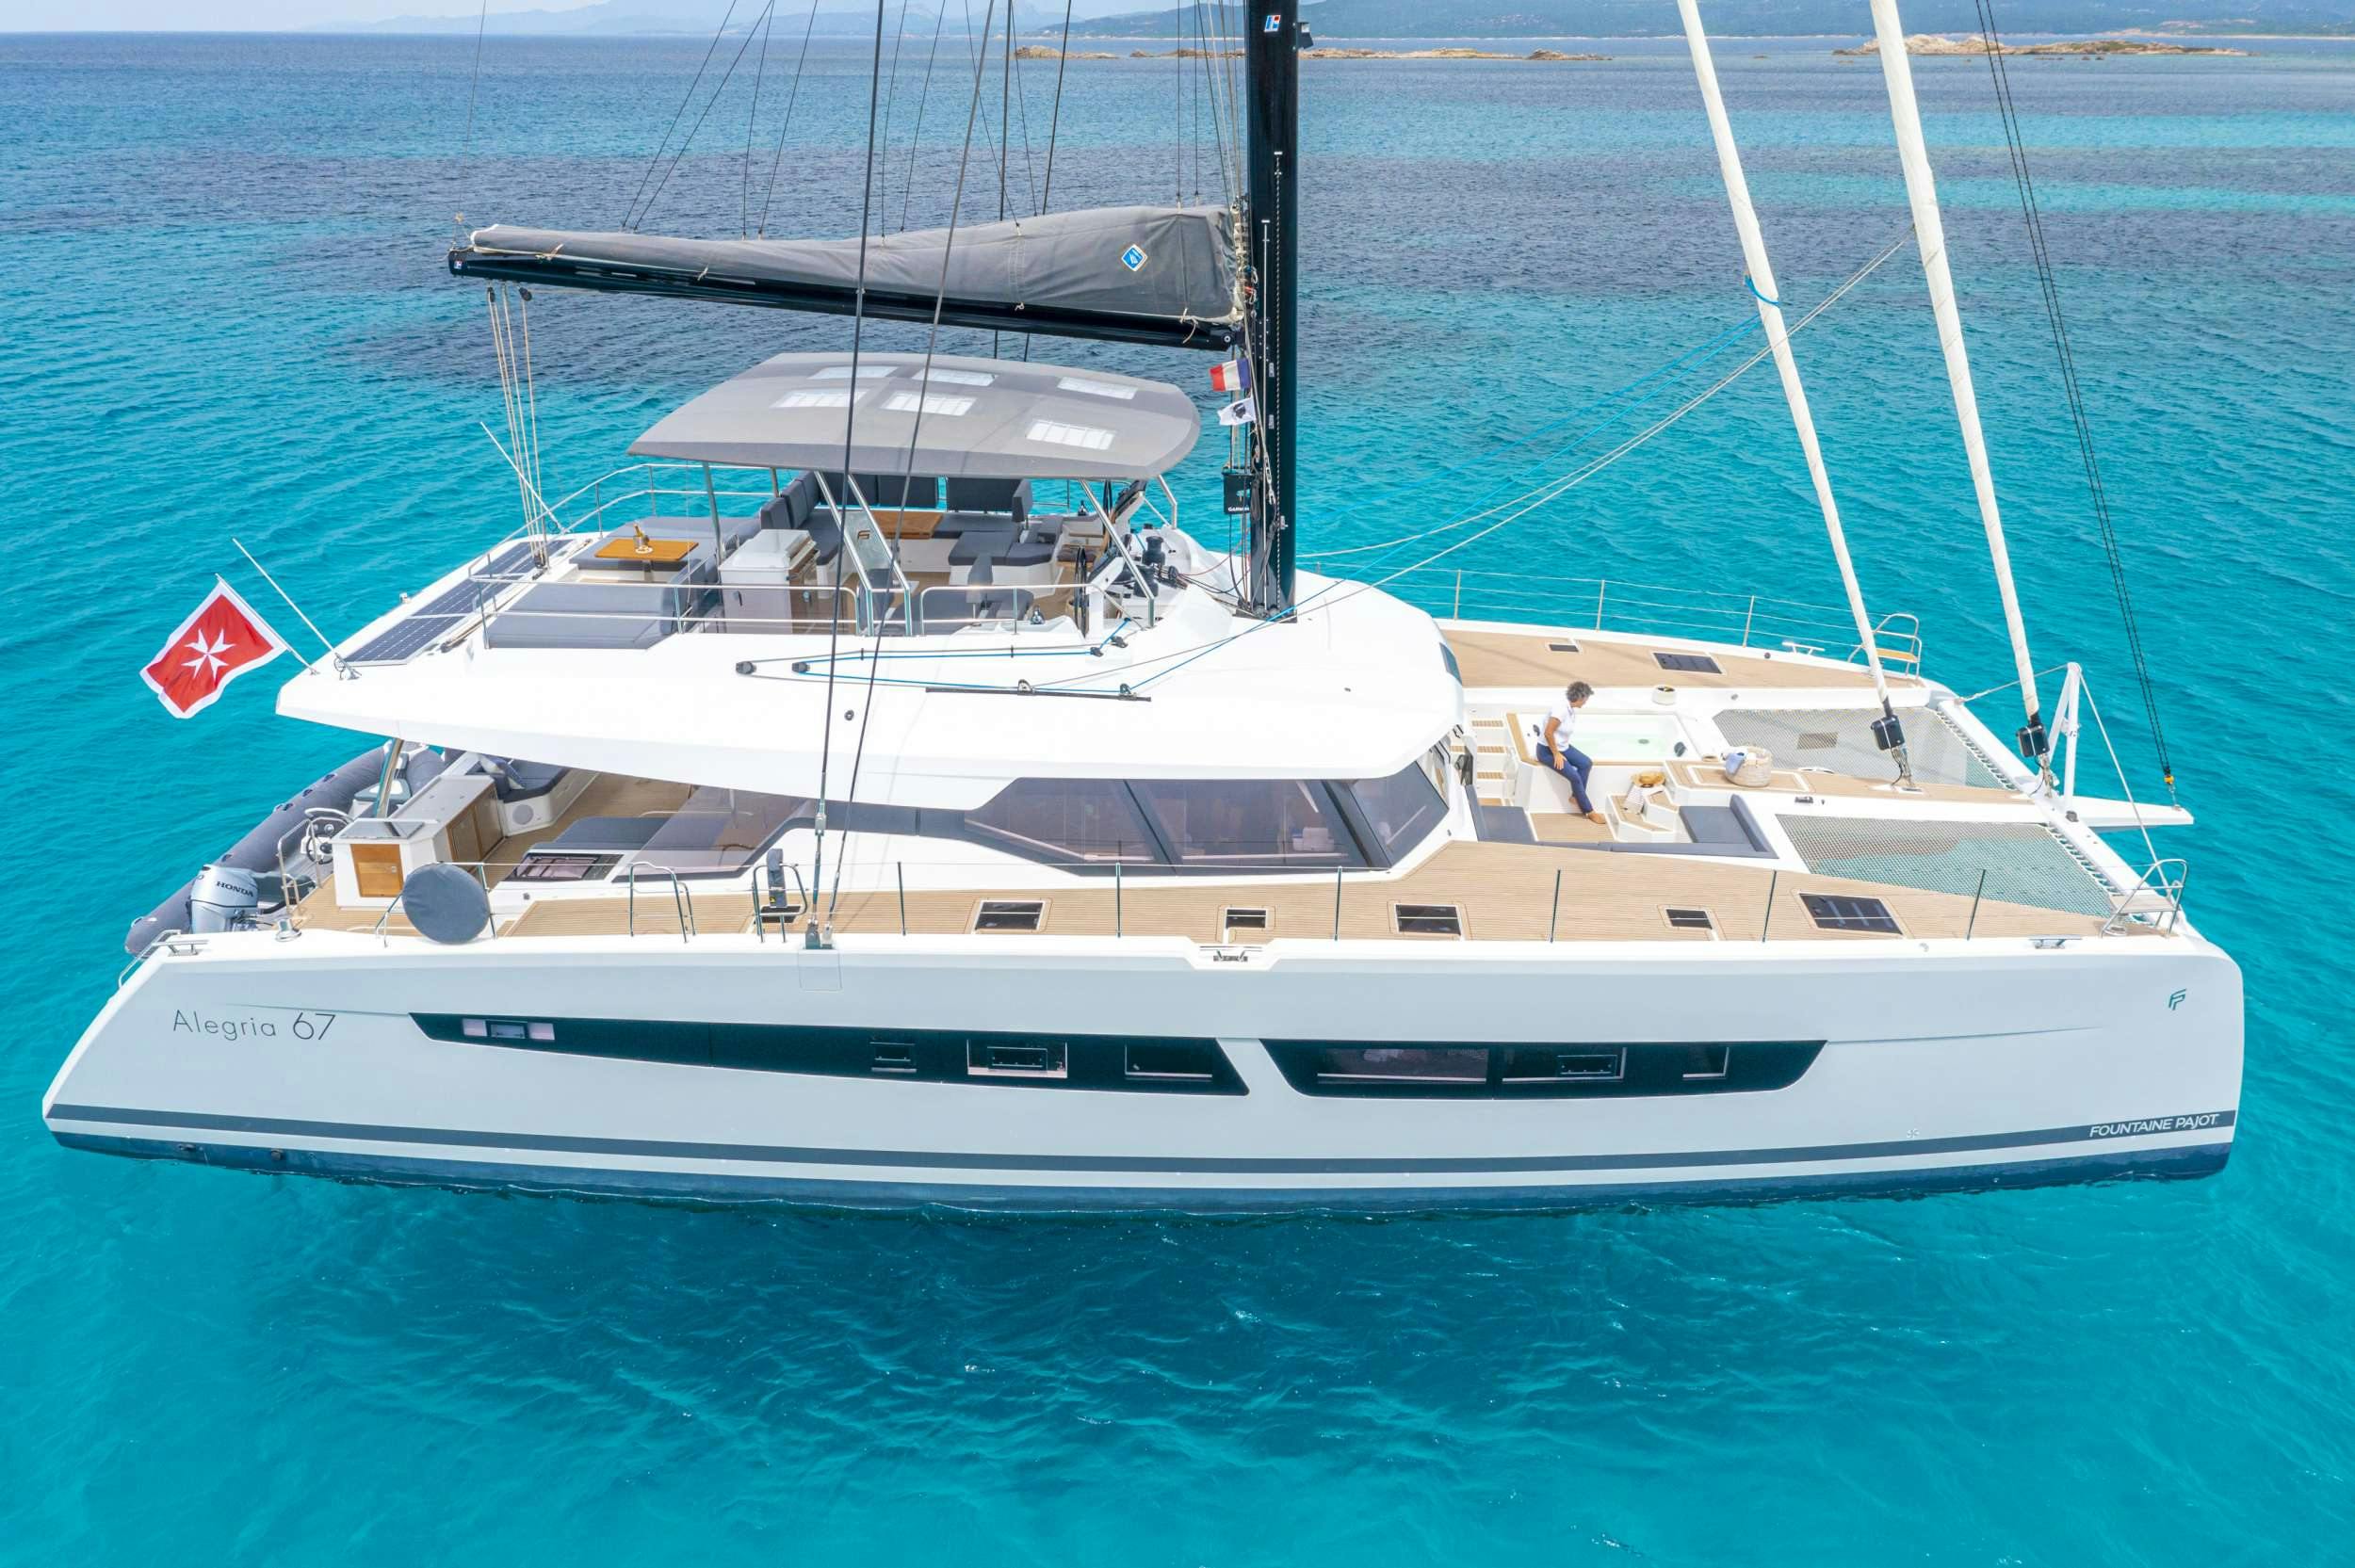 SEMPER FIDELIS  - Yacht Charter Saint Vincent and the Grenadines & Boat hire in Bahamas & Caribbean 1